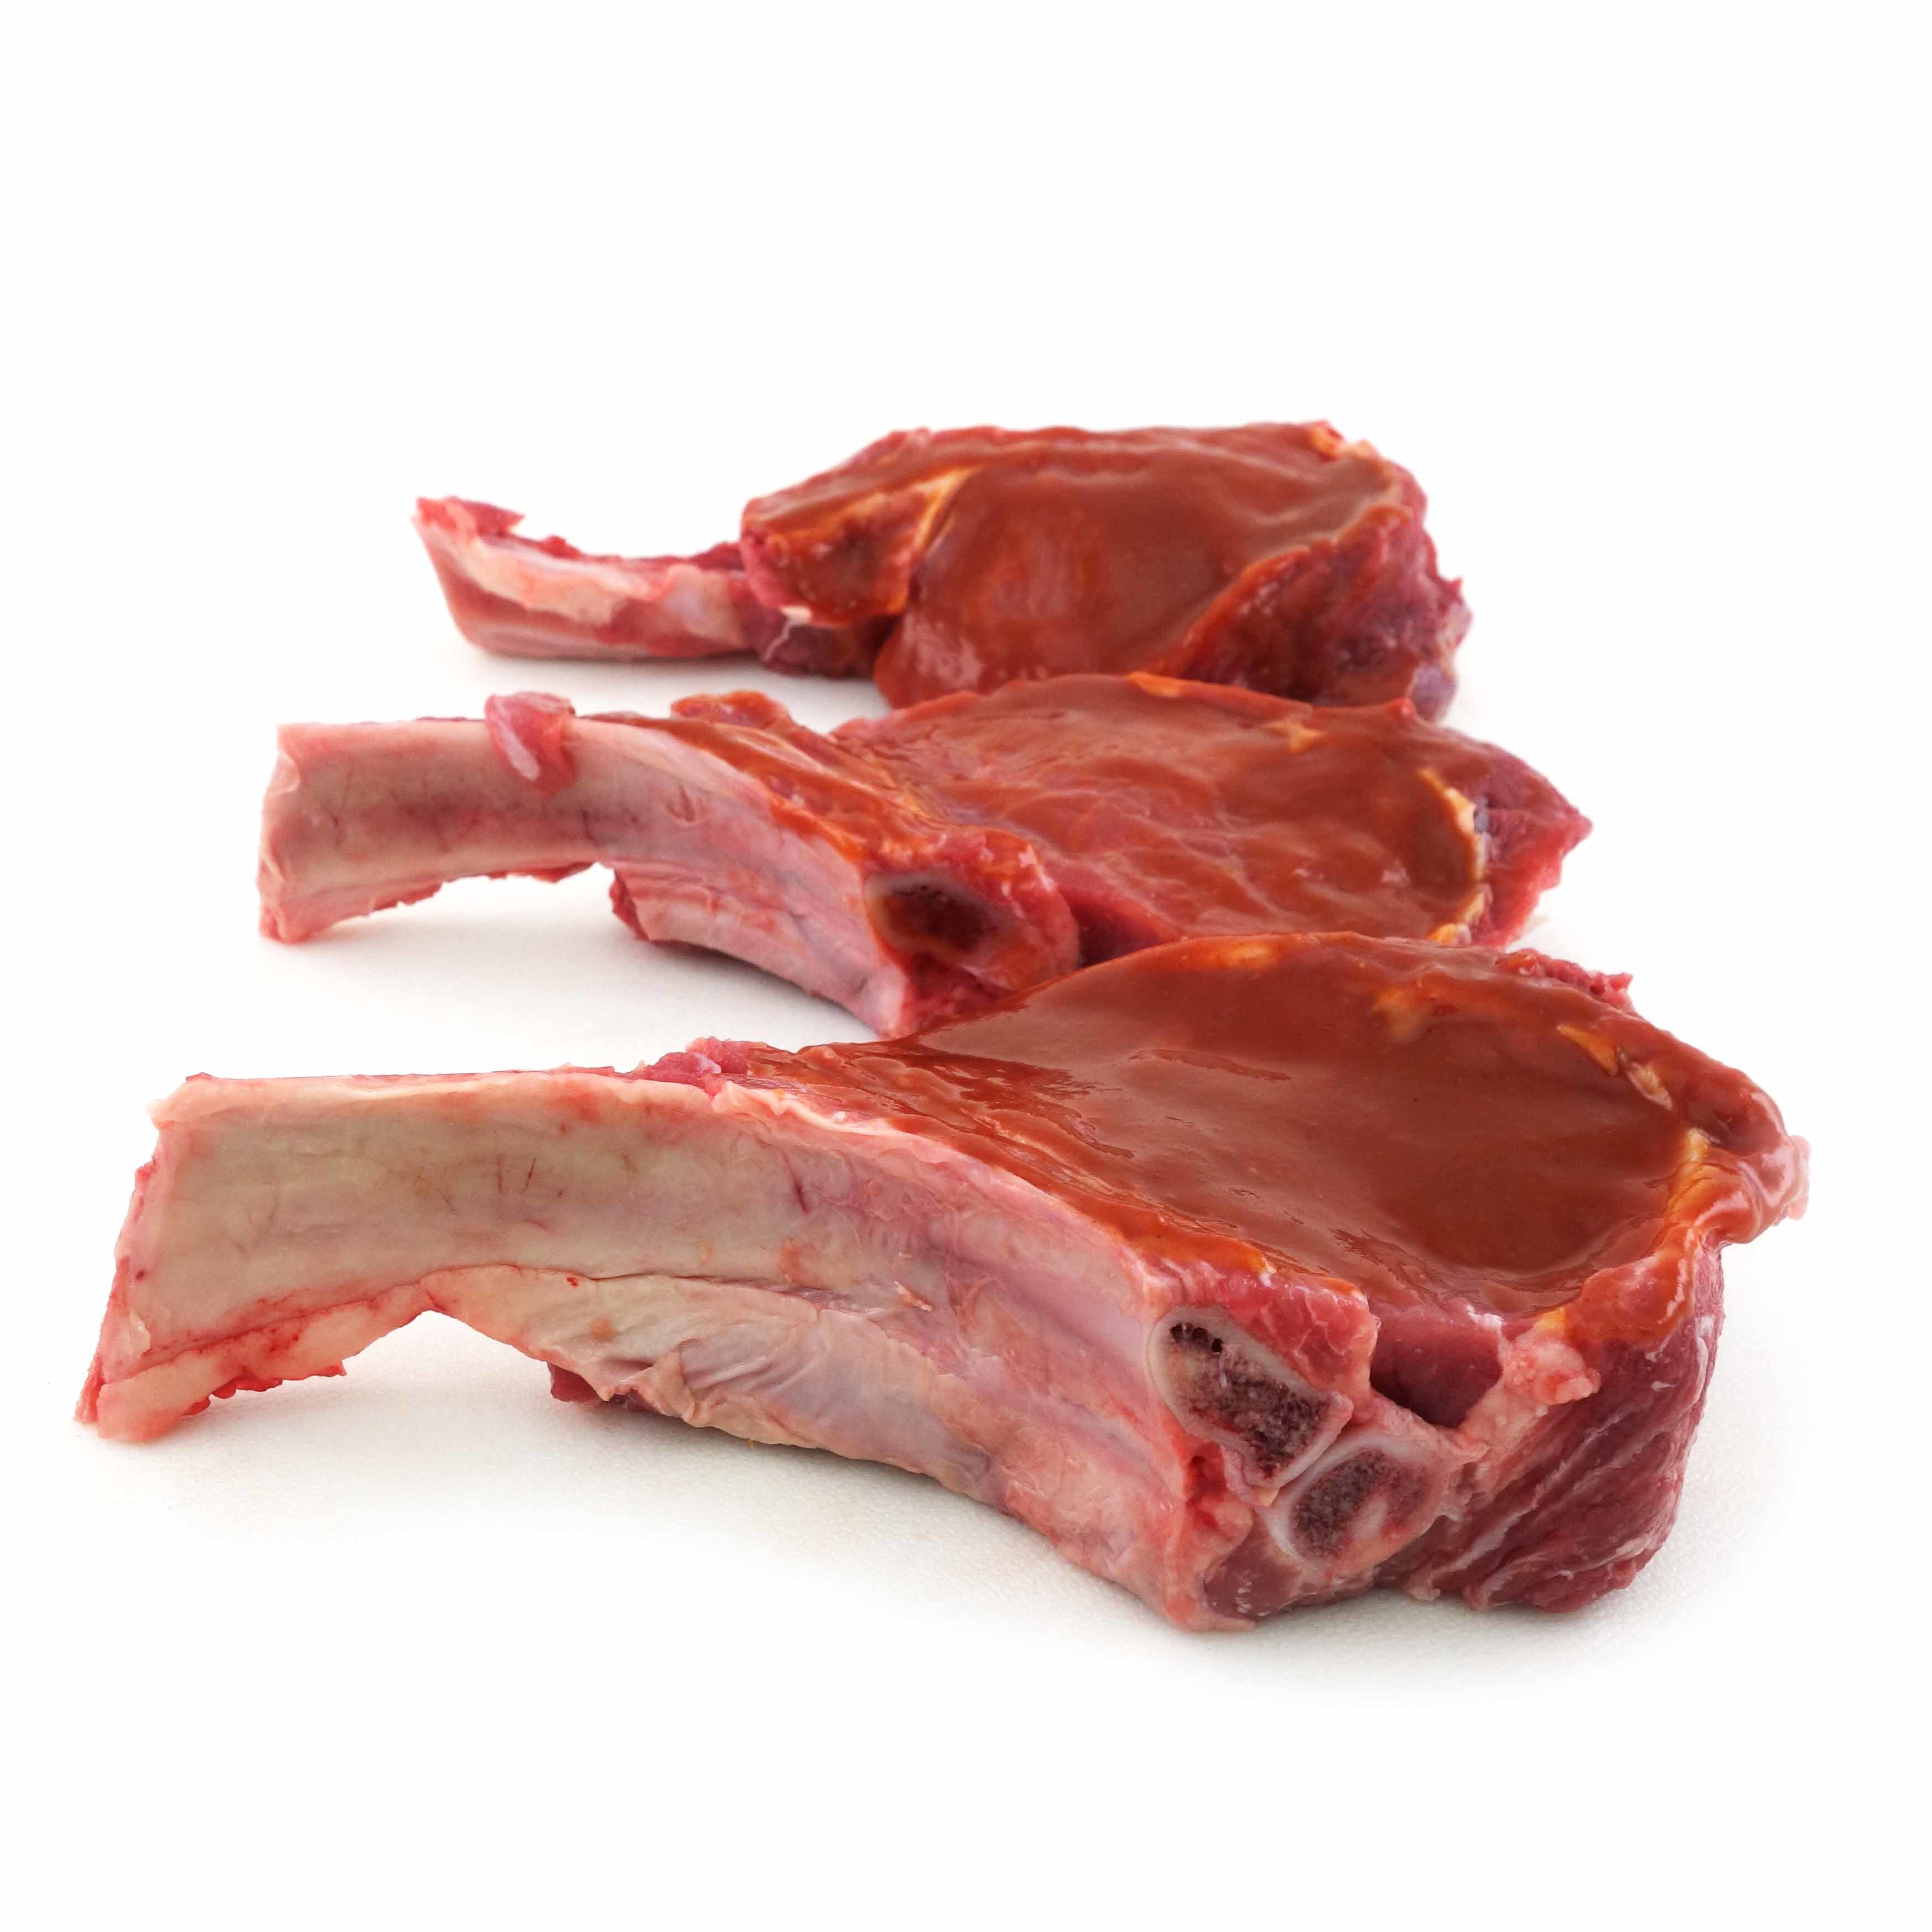 AUS Marinated Veal Chops